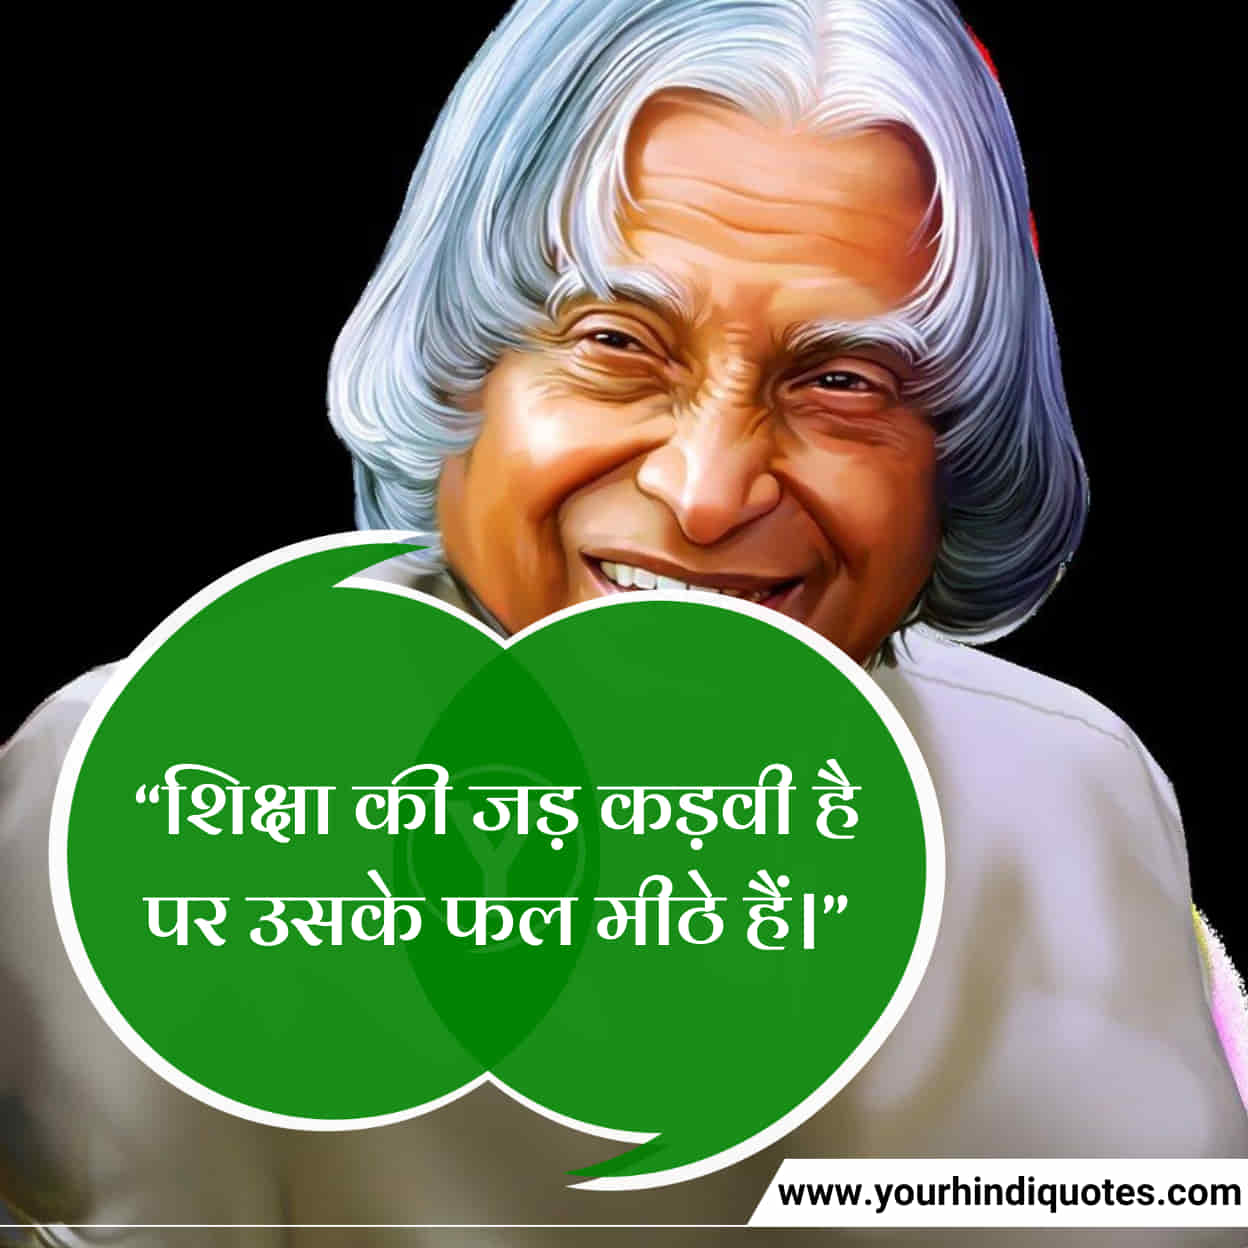 Best Education Quotes In Hindi